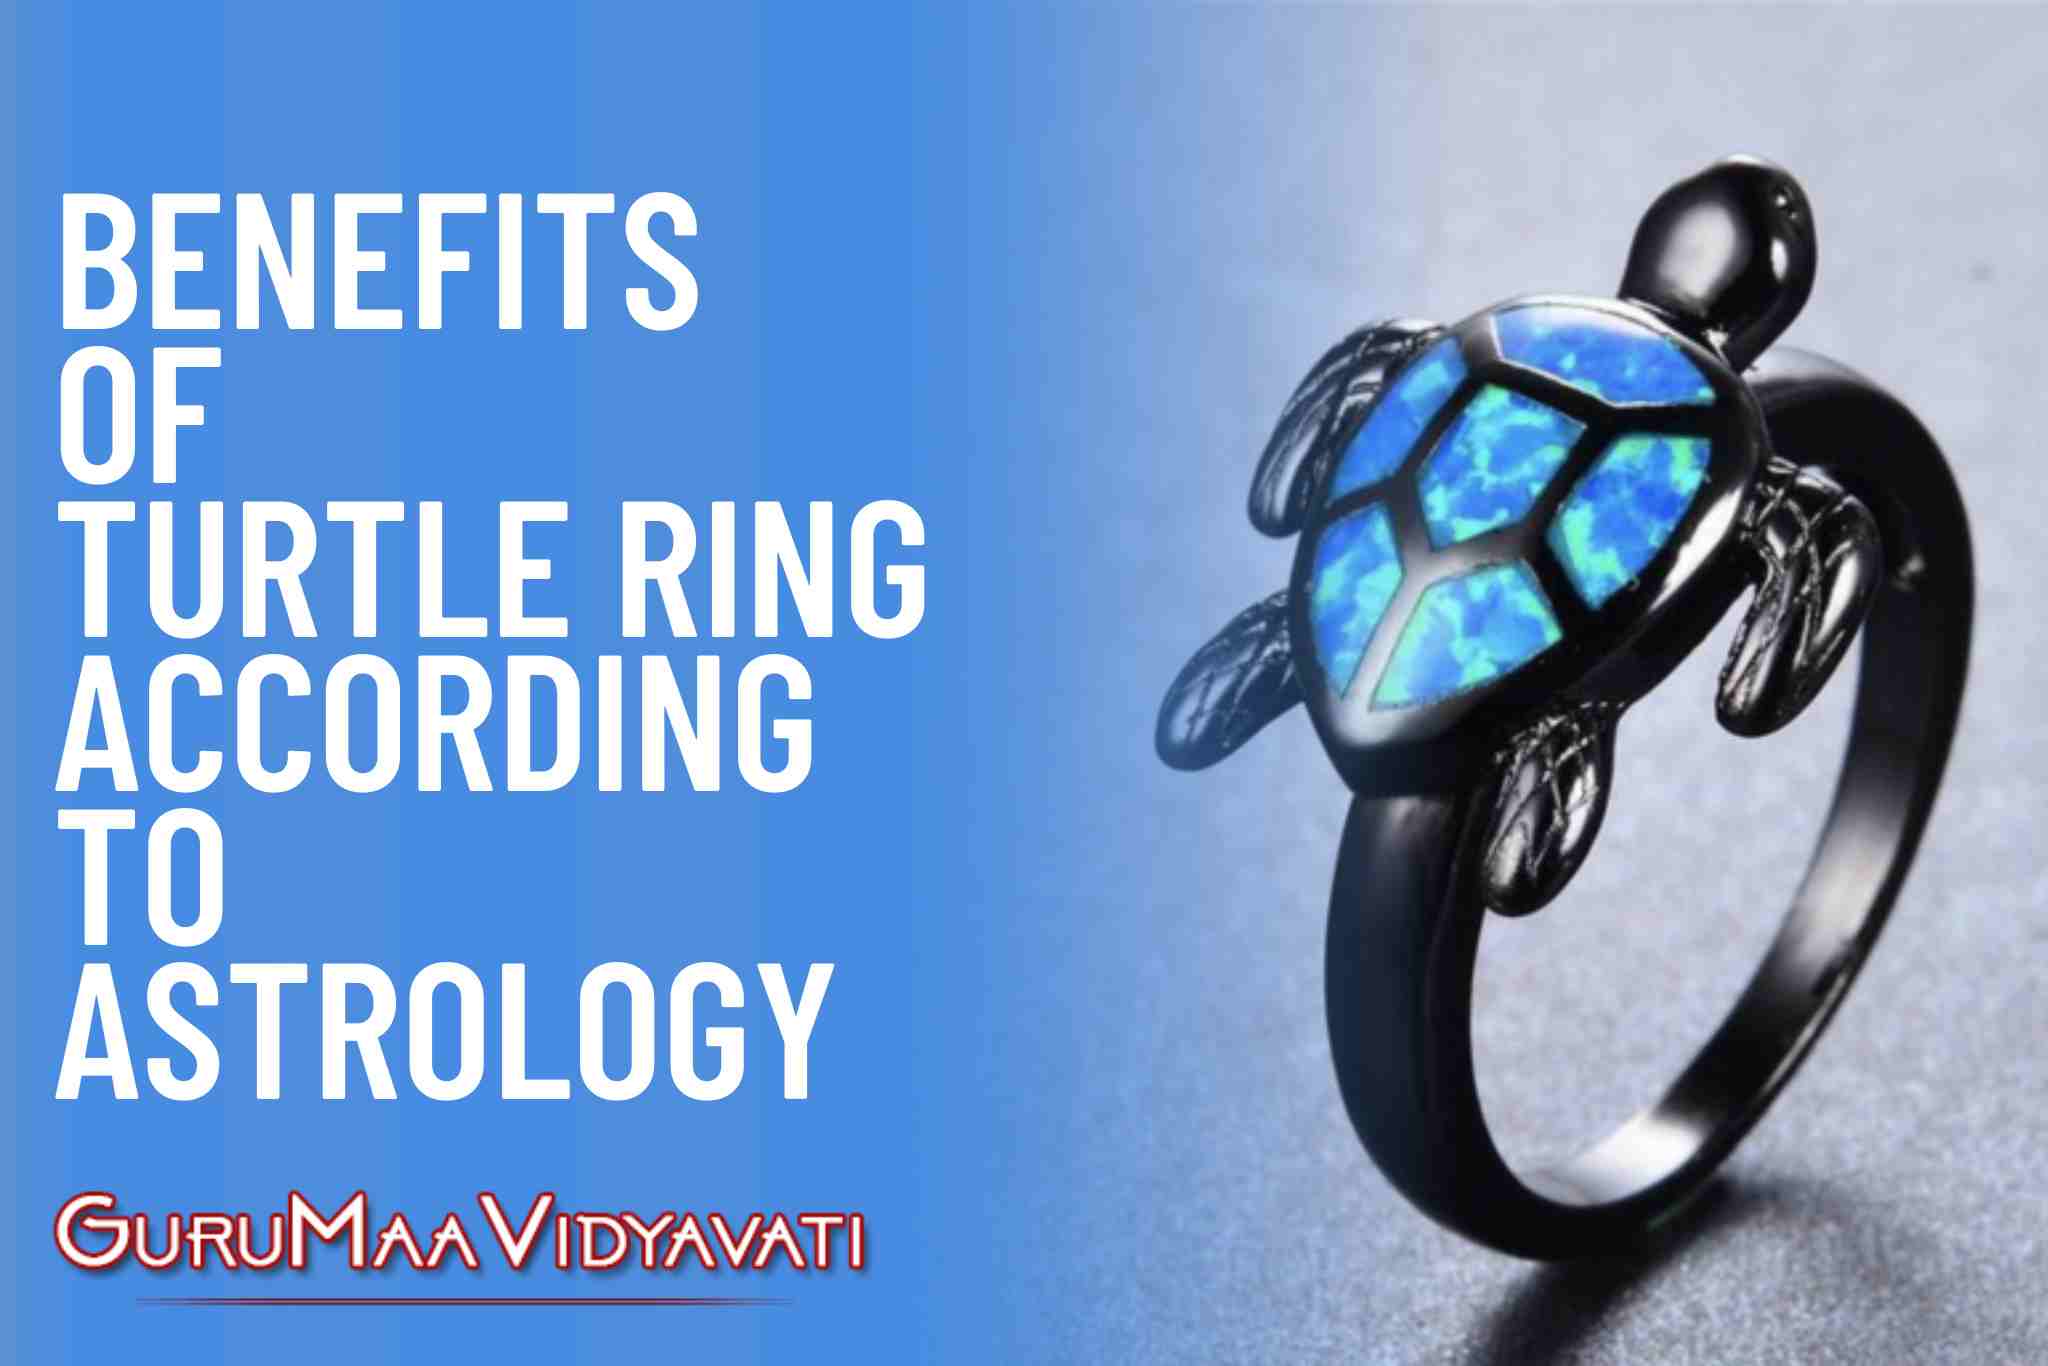 What are the Benefits of Turtle Ring according to Astrology?